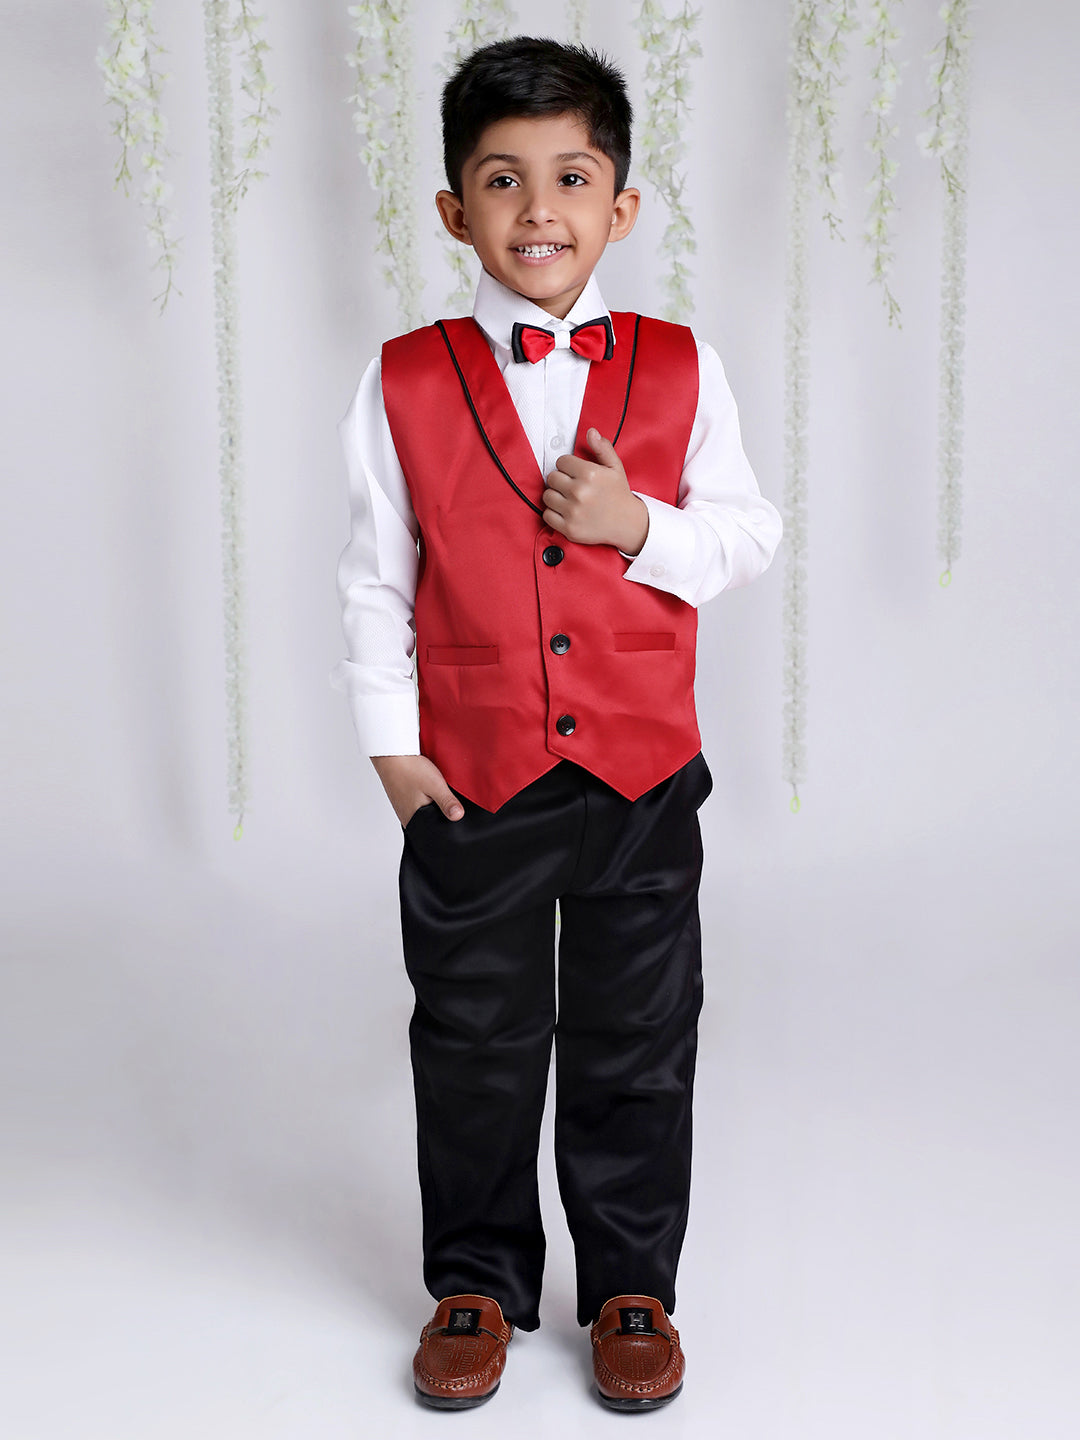 Boy's Party Wear suit with bow-tie - KID1 Boys